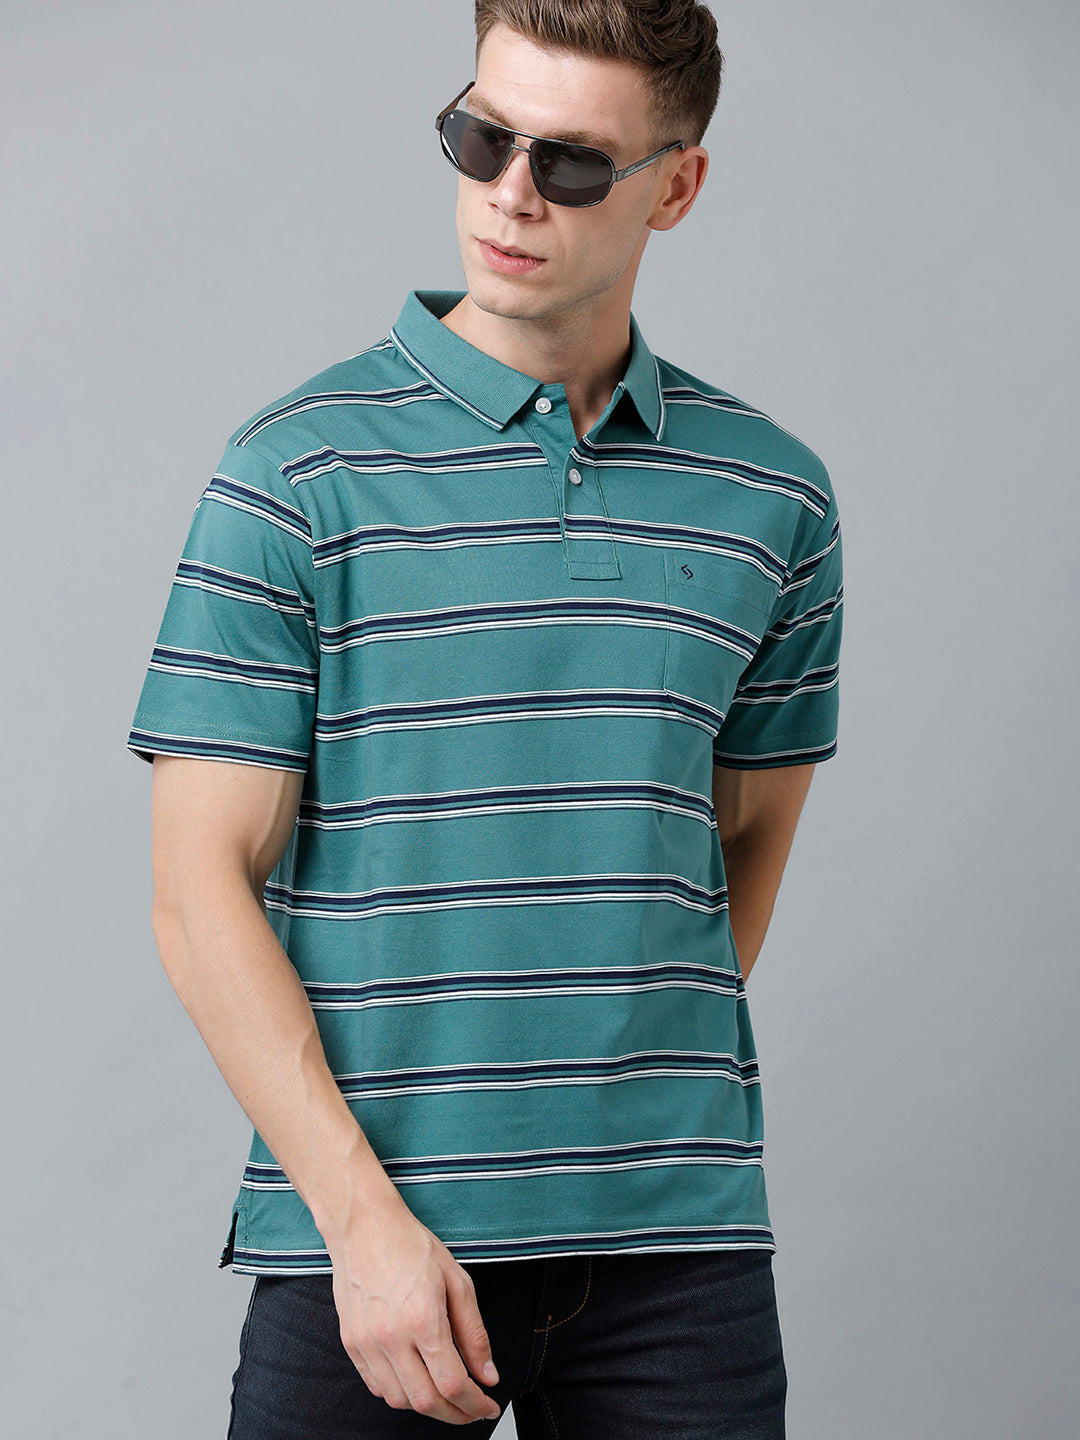 Classic Polo Men's Cotton Half Sleeve Striped Authentic Fit Polo Neck Green Color T-Shirt | Ap - 82 B